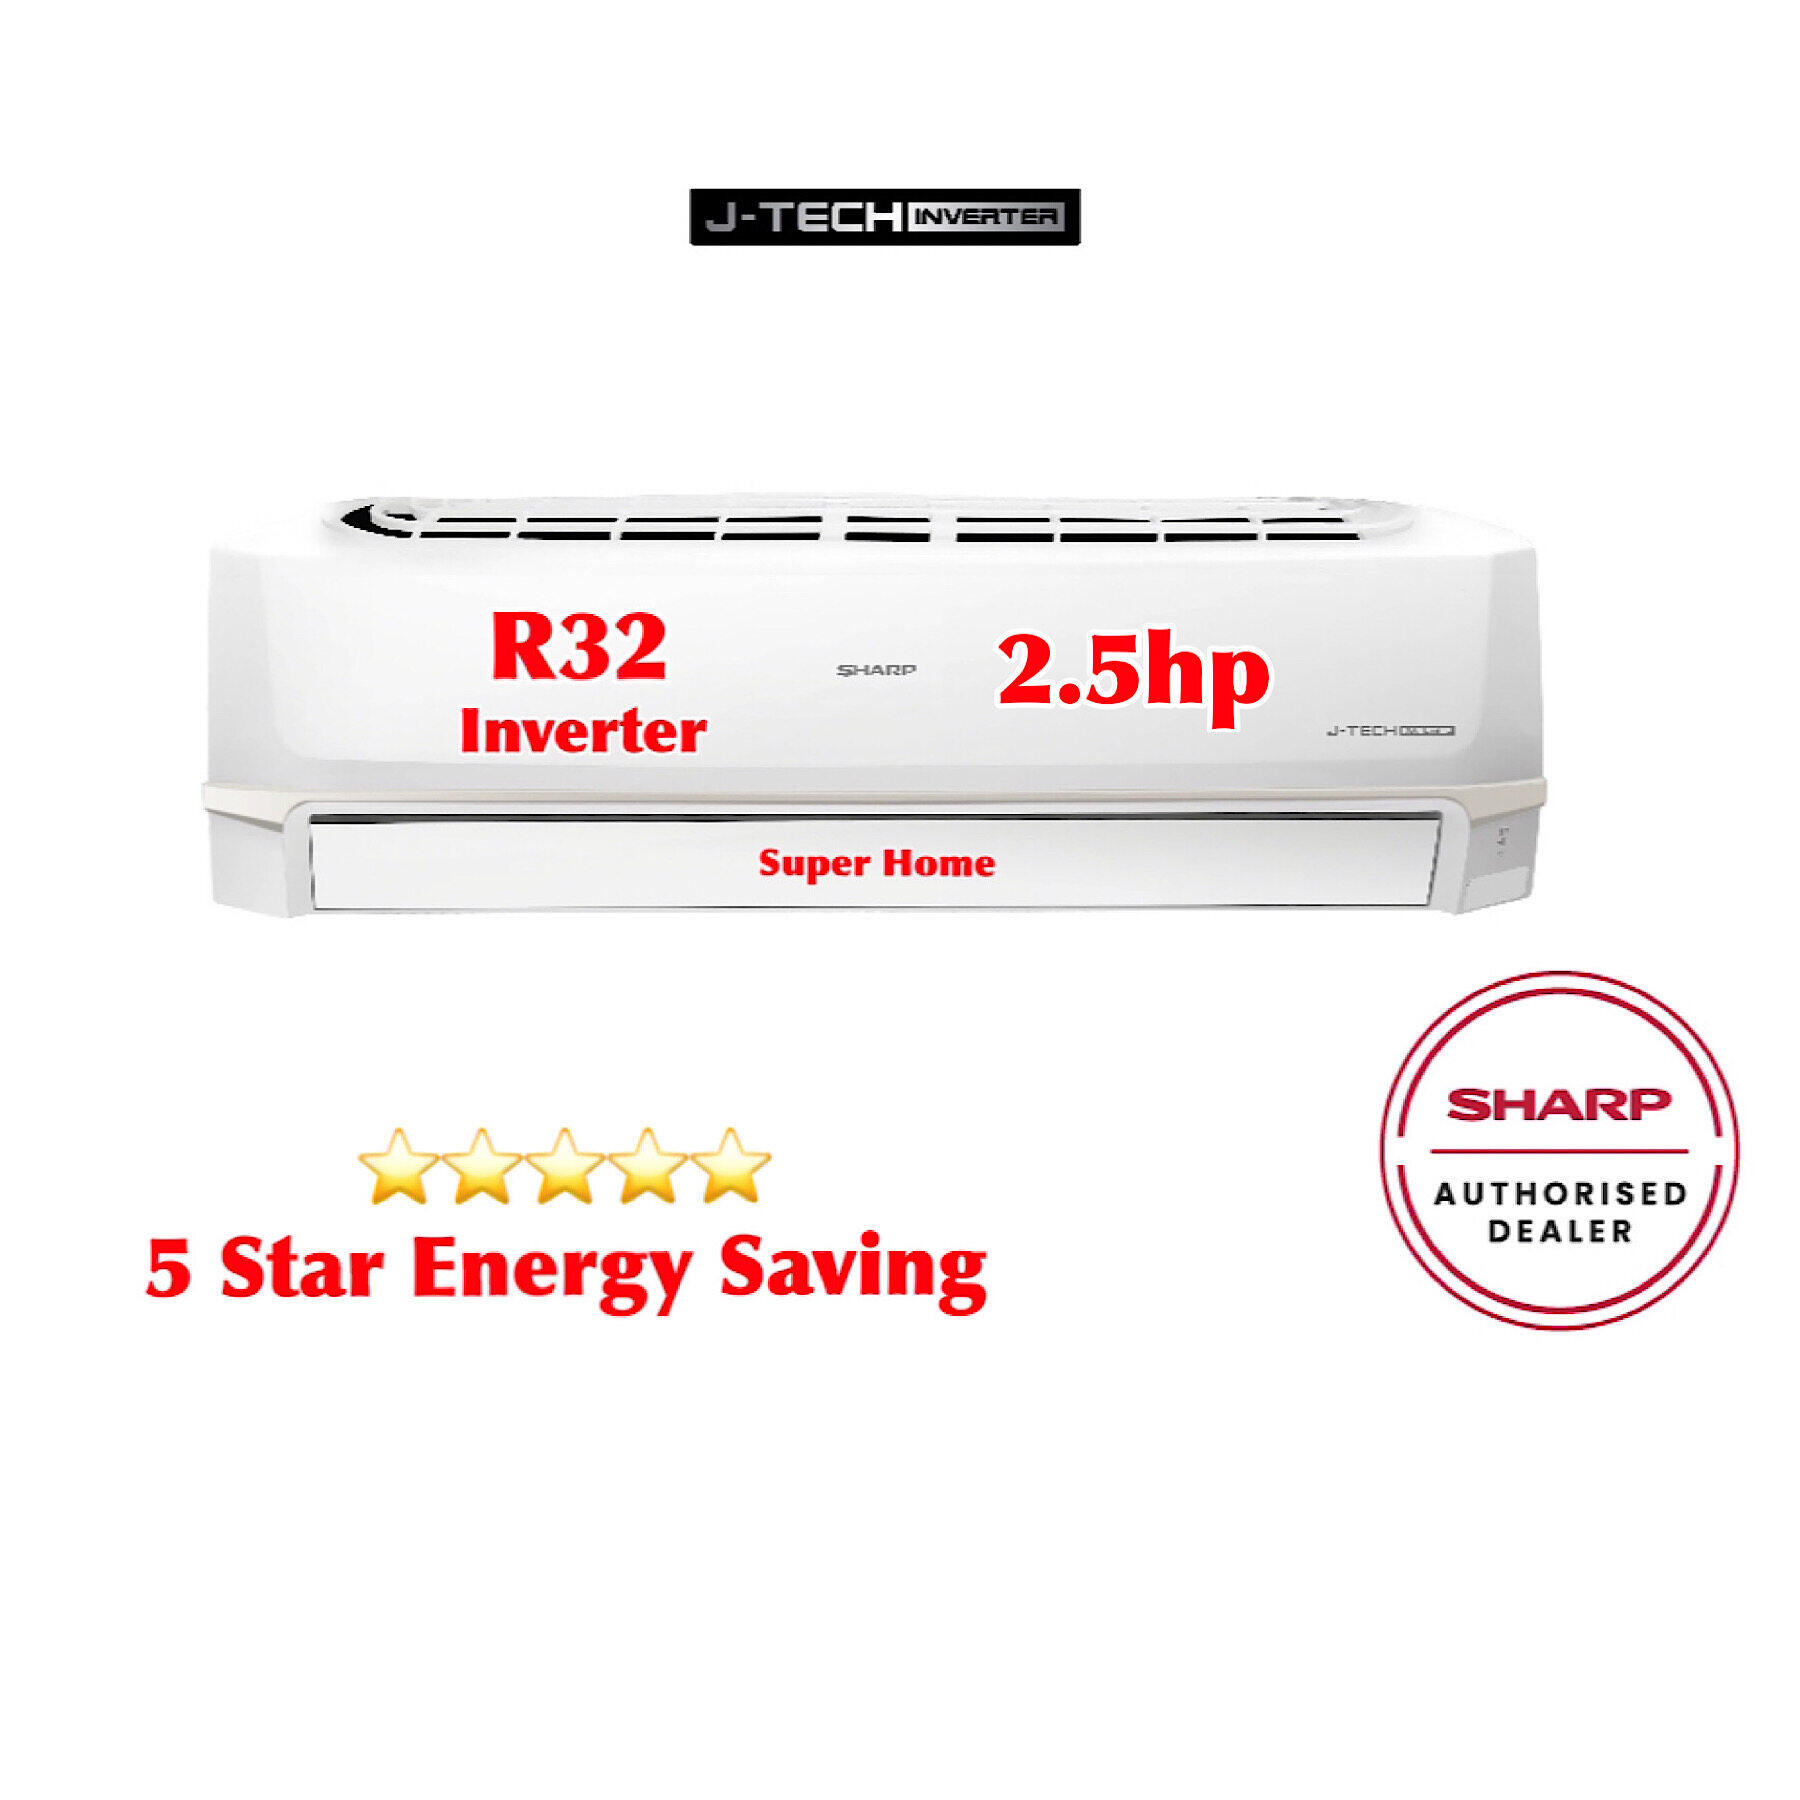 Sharp R32 J-Tech Standard Inverter Aircond AHX24VED & AUX24VED 2.5hp R32 Inverter Air Conditioner - 5 Star Energy Saving